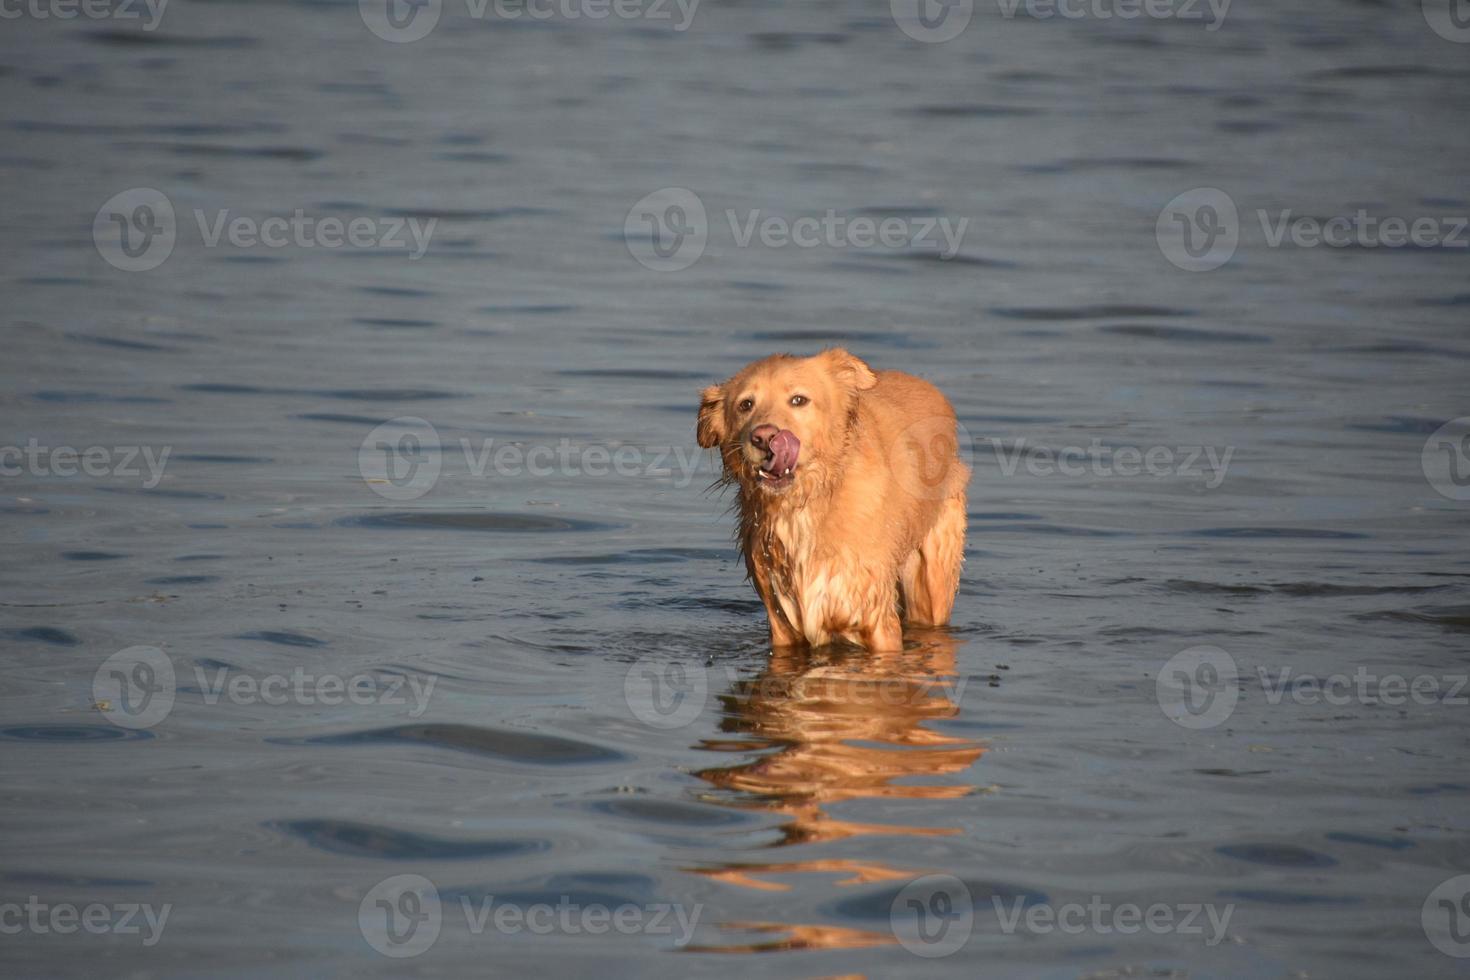 Wet Duck Tolling Retriever Dog Standing in Water Licking His Nose photo